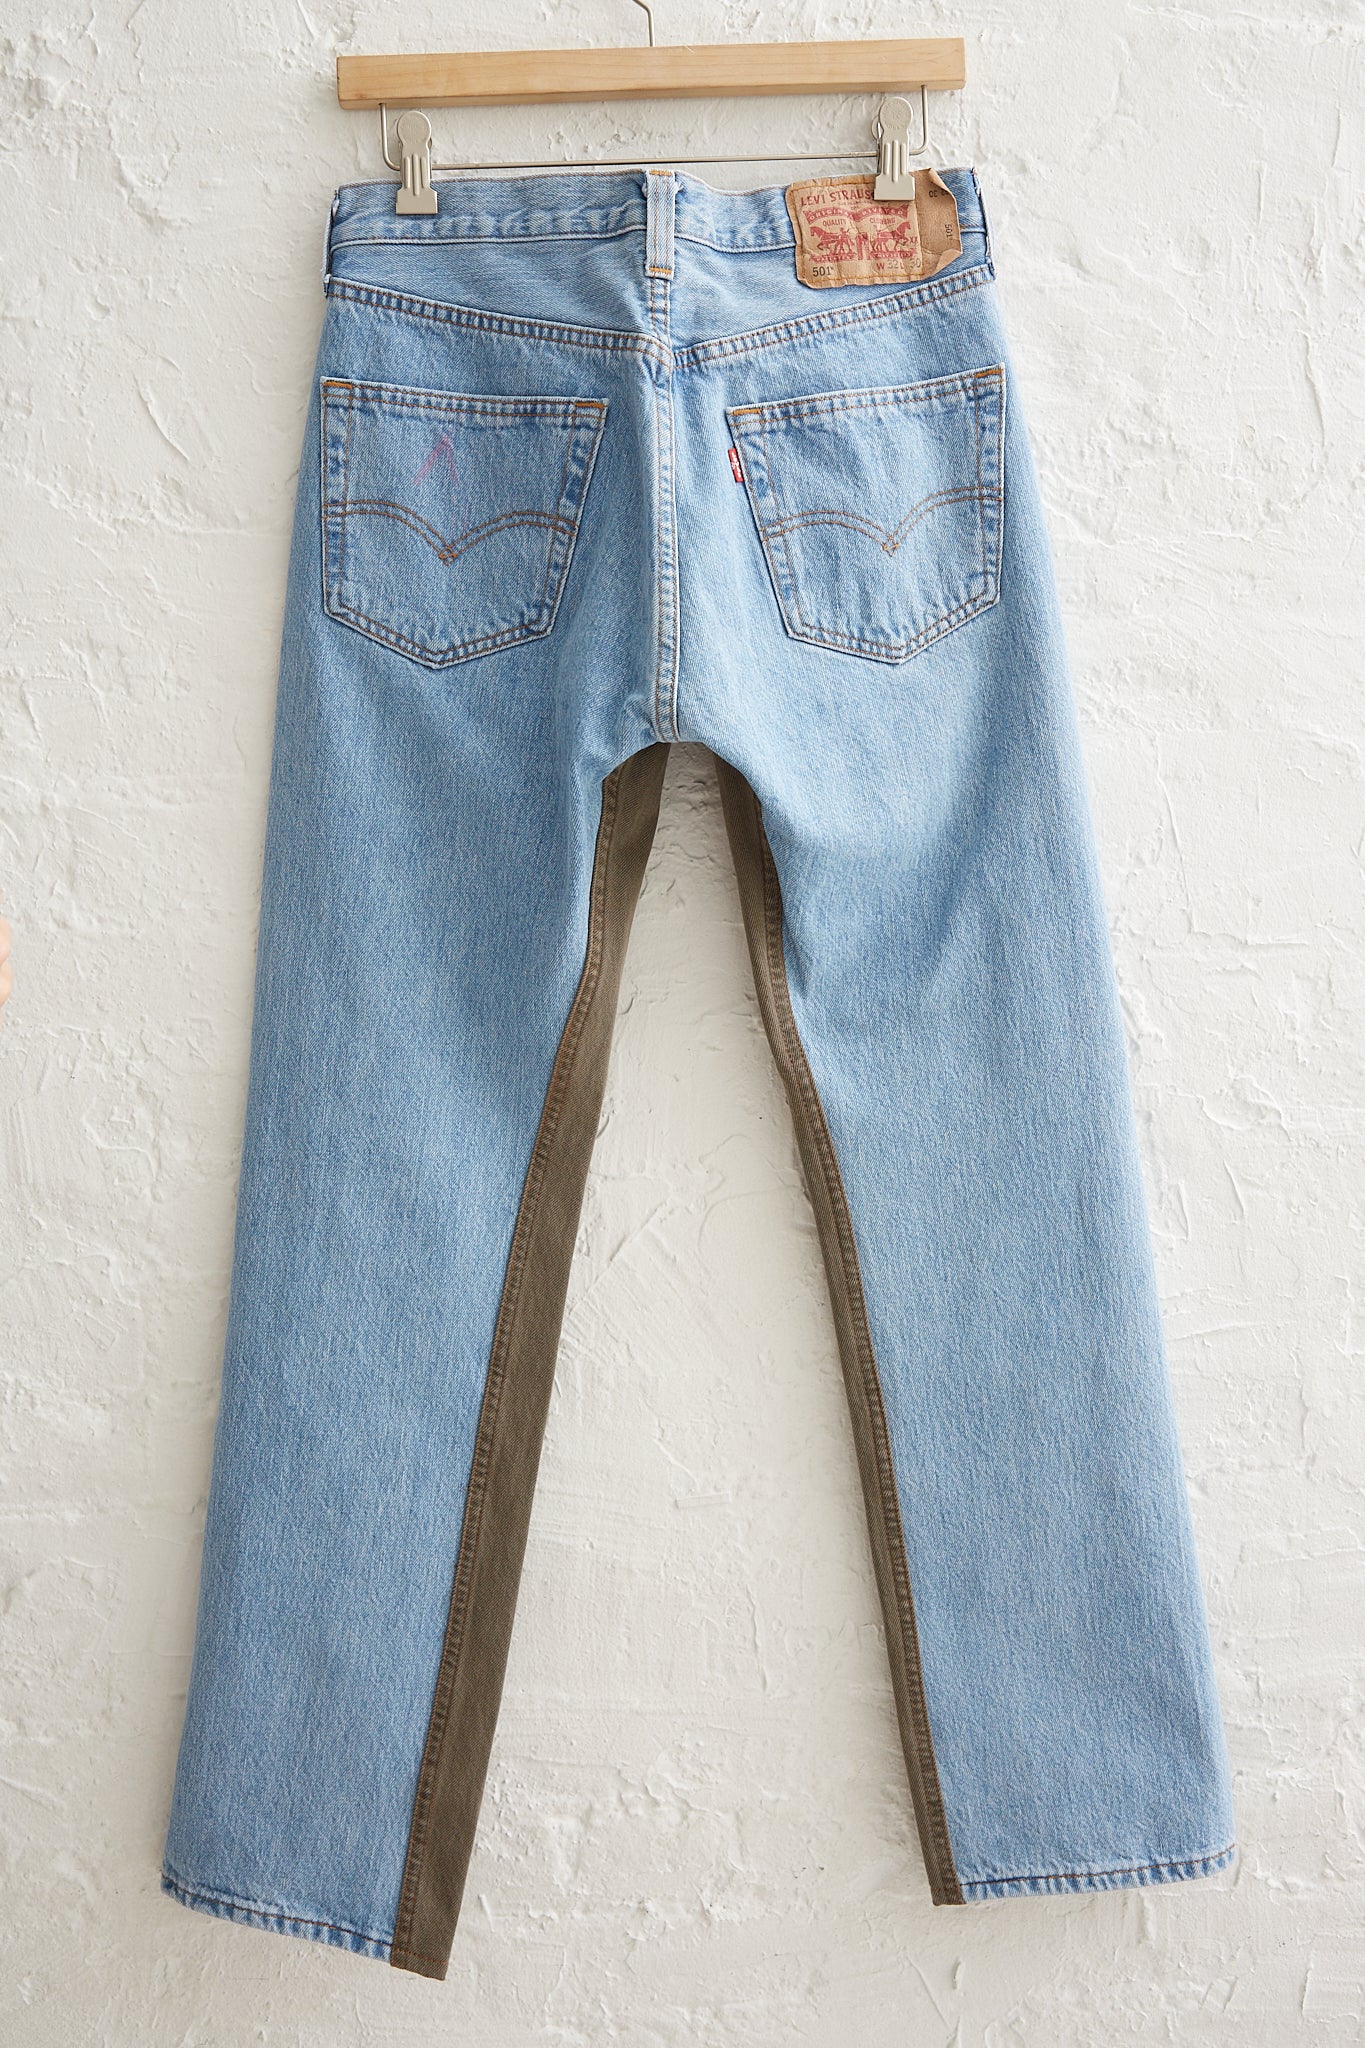 A pair of Bless Jeanspleatfront No. 73 in Surprise Color Mix A with a 5-pocket design hanging on a white wall.